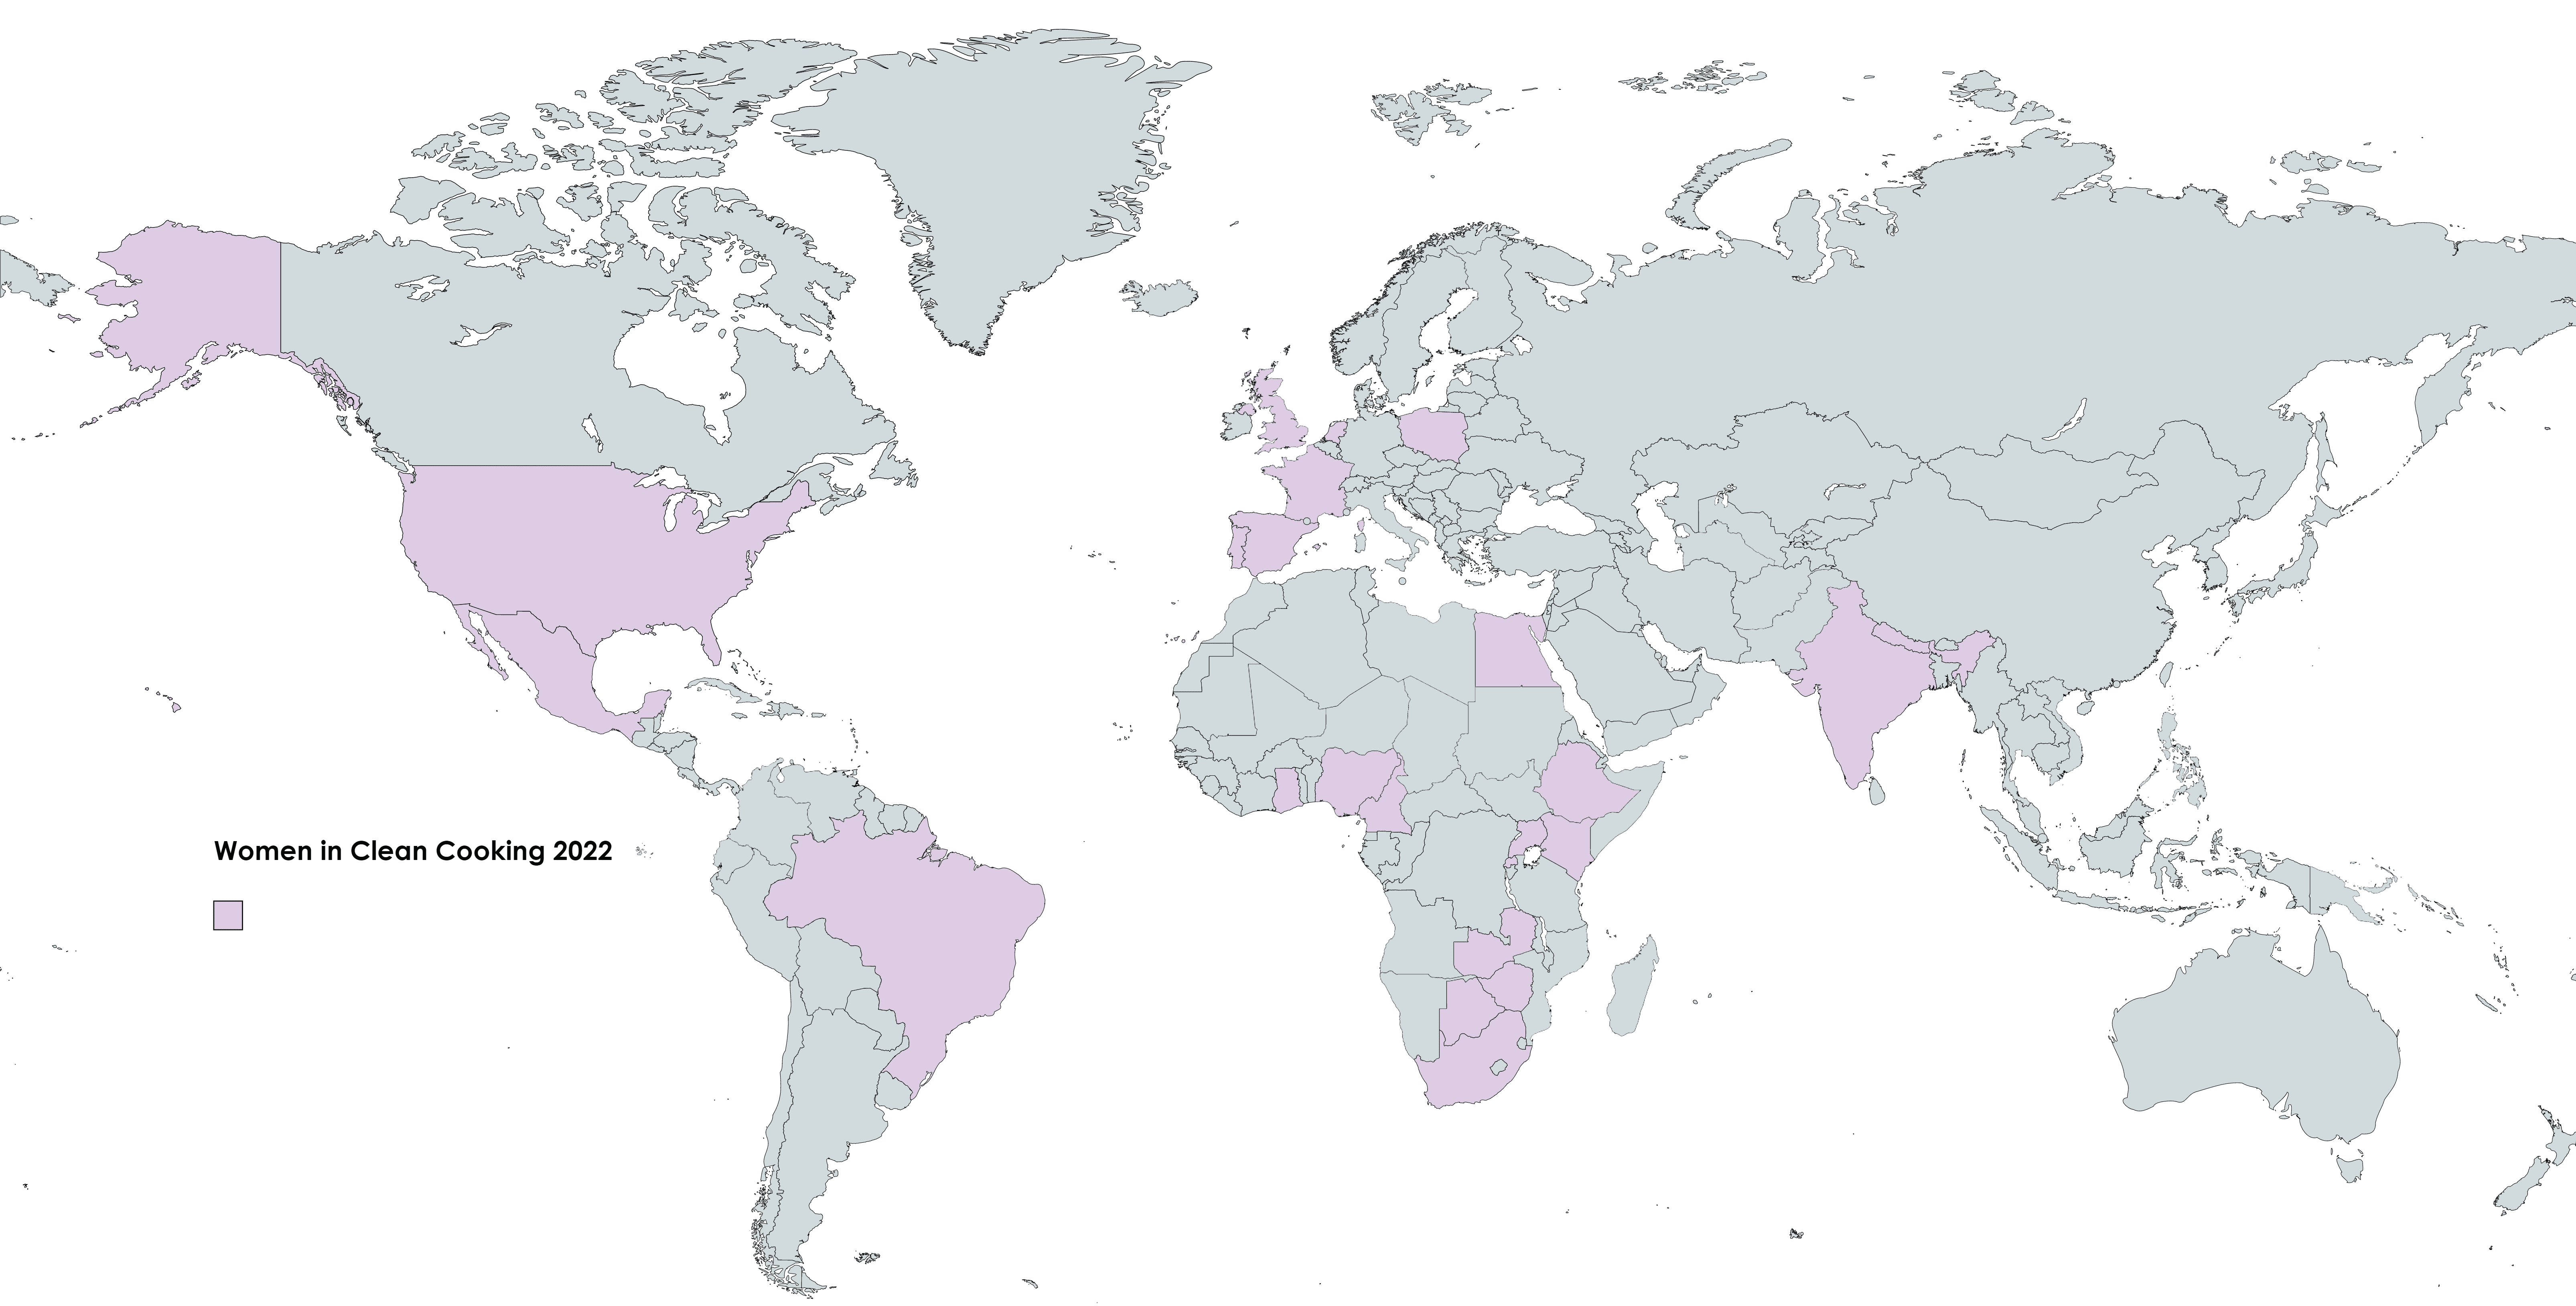 Map of the world with women in clean cooking mentor countries highlighted in purple